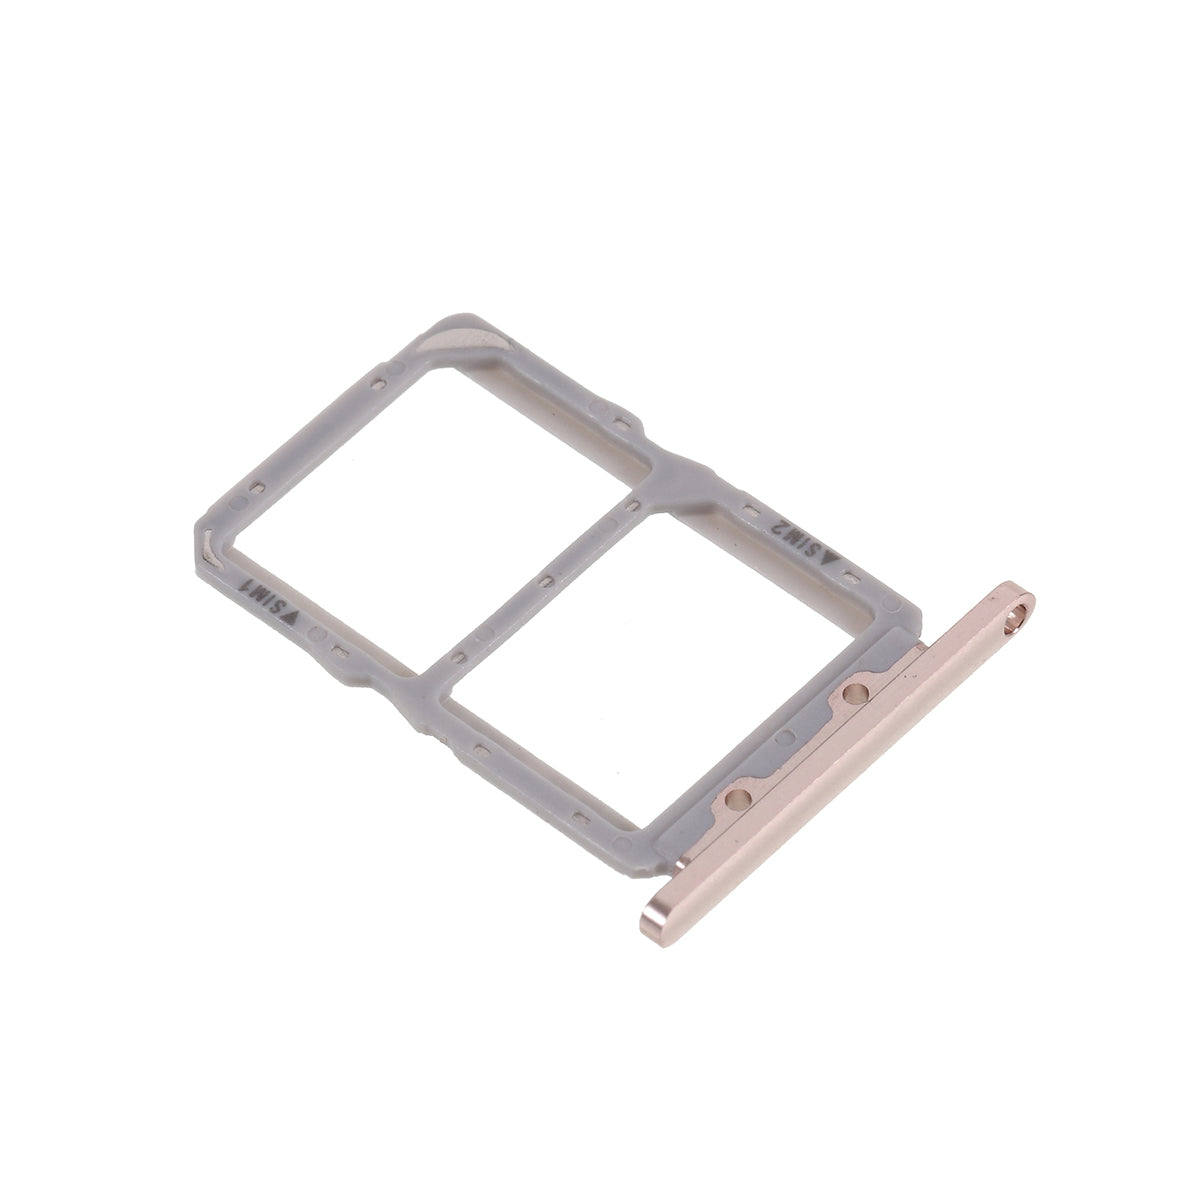 OEM SIM Card Tray Slot Holder Part for Huawei Honor 20 Pro - Gold